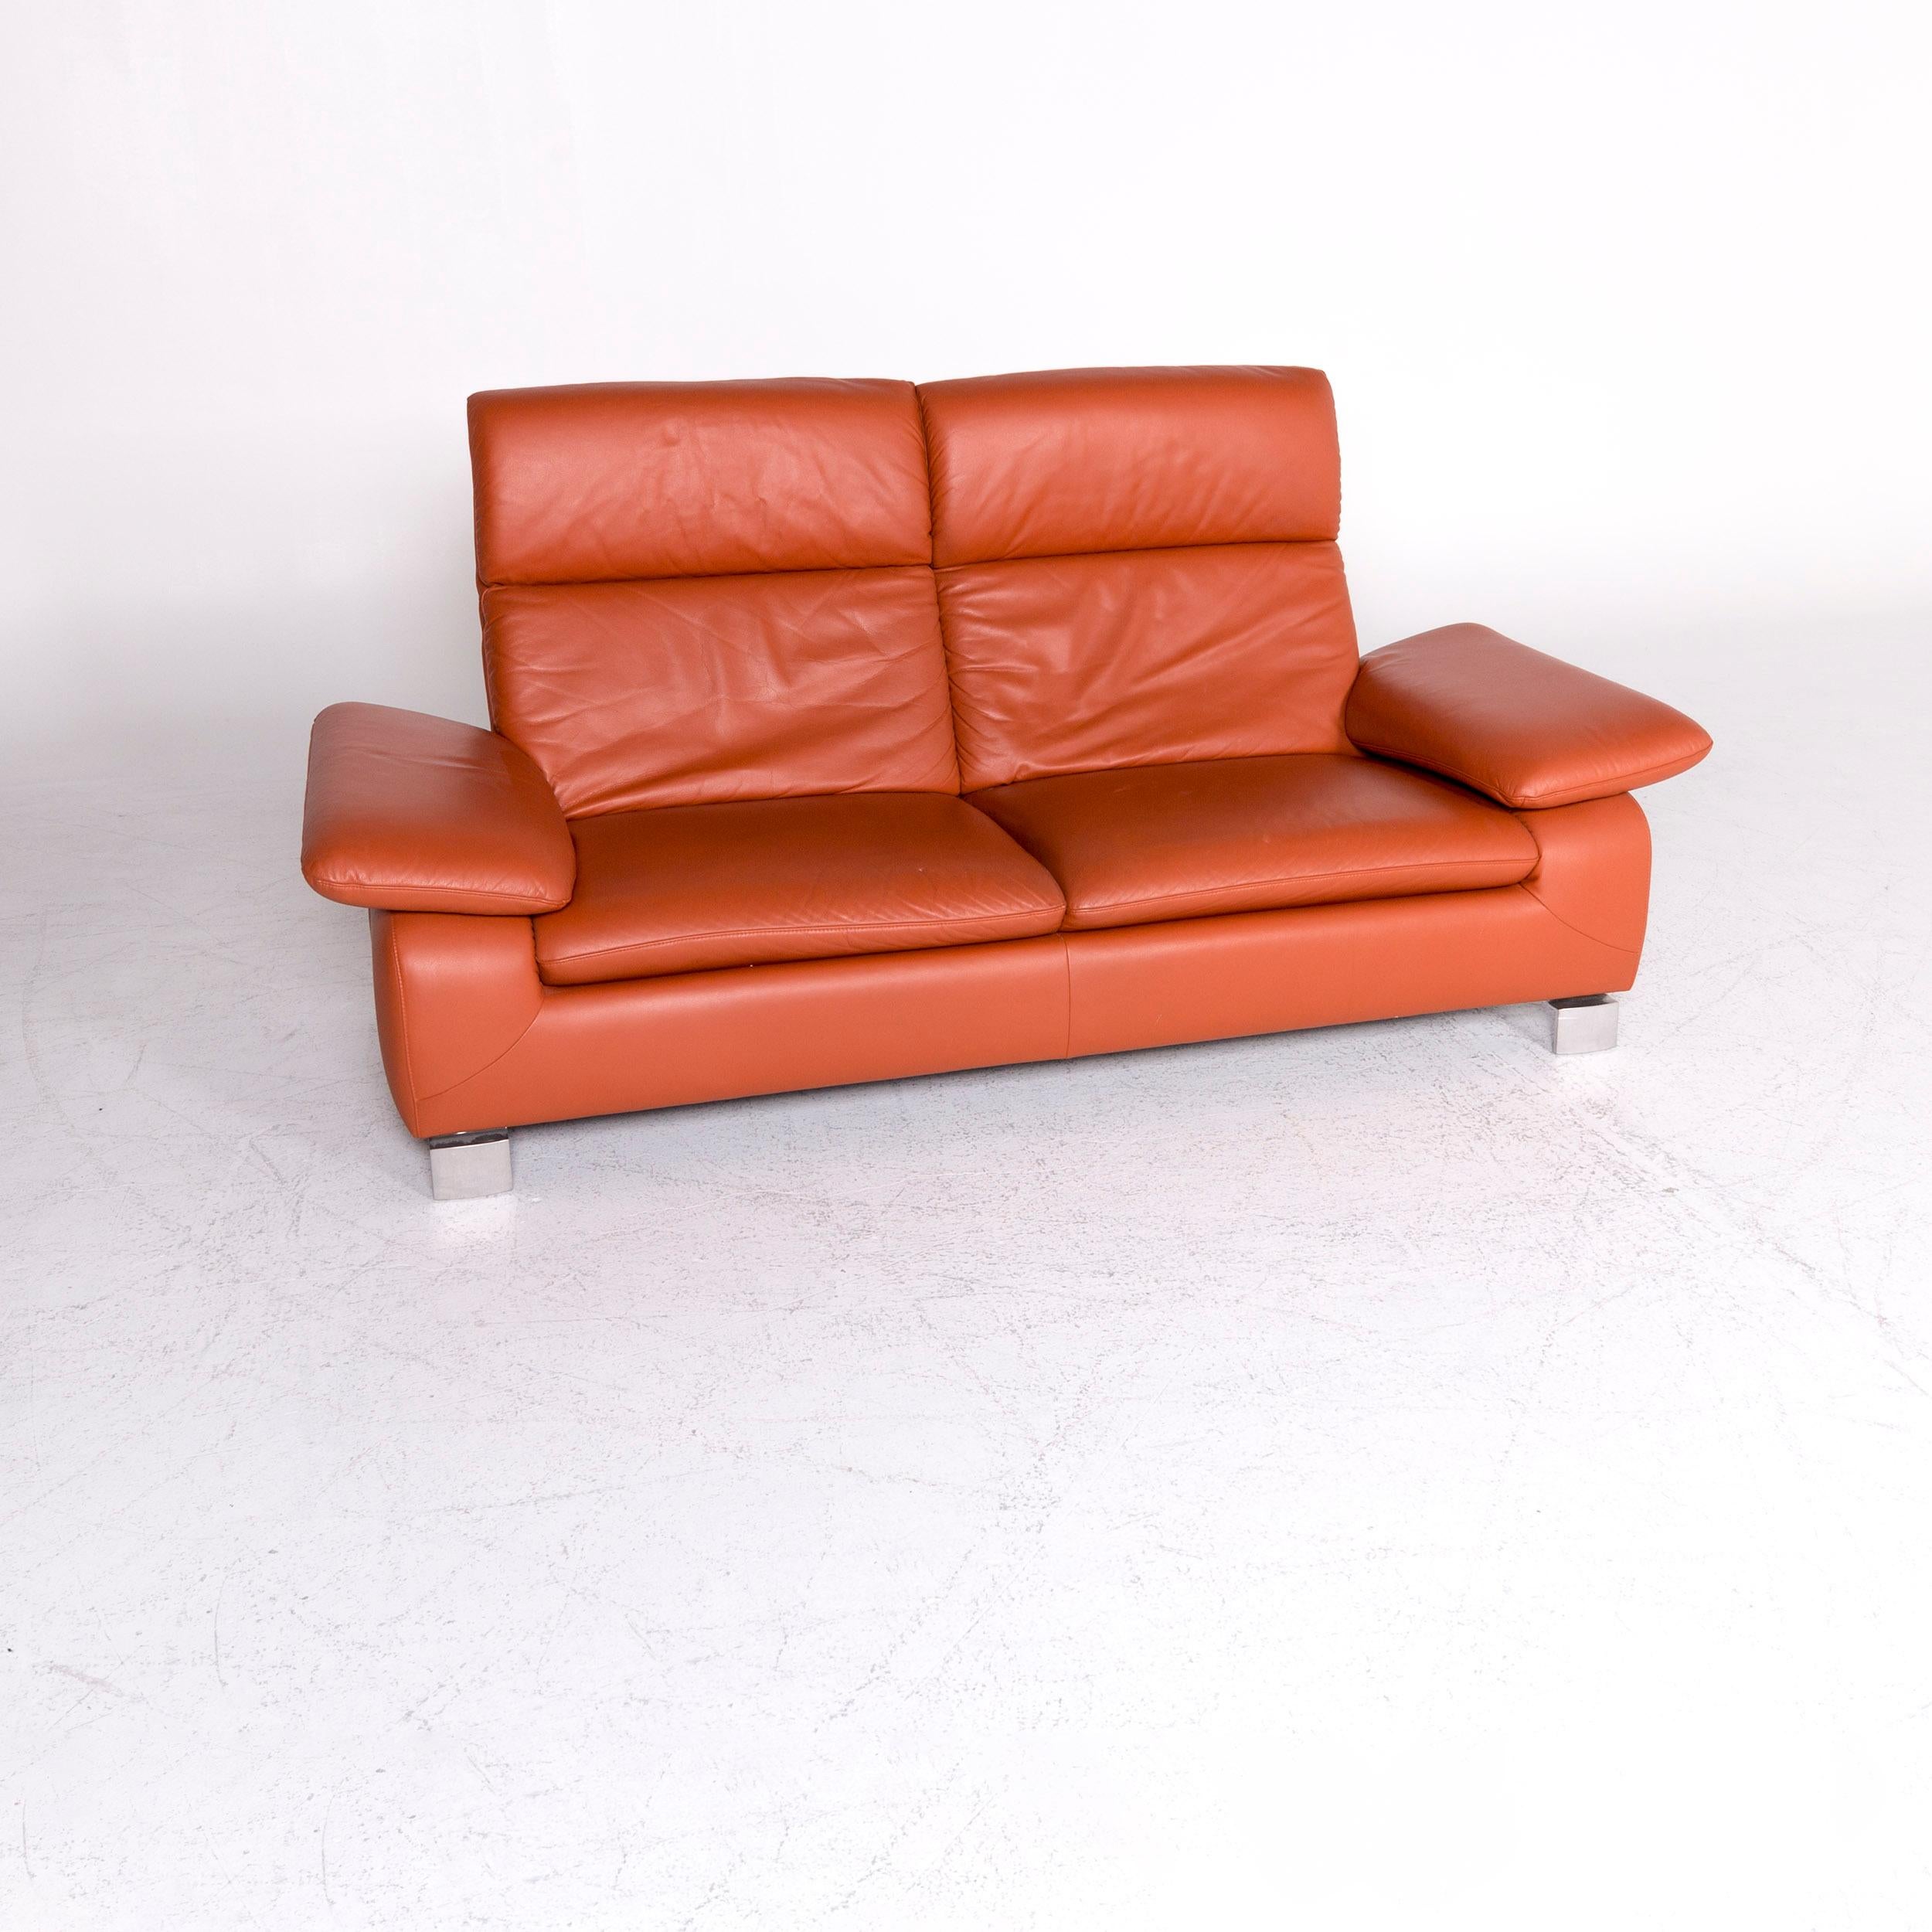 We bring to you an Ewald Schillig designer leather sofa orange three-seat couch.

Product measurements in centimeters:

Depth 88
Width 200
Height 103
Seat-height 42
Rest-height 57
Seat-depth 55
Seat-width 133
Back-height 61.
     